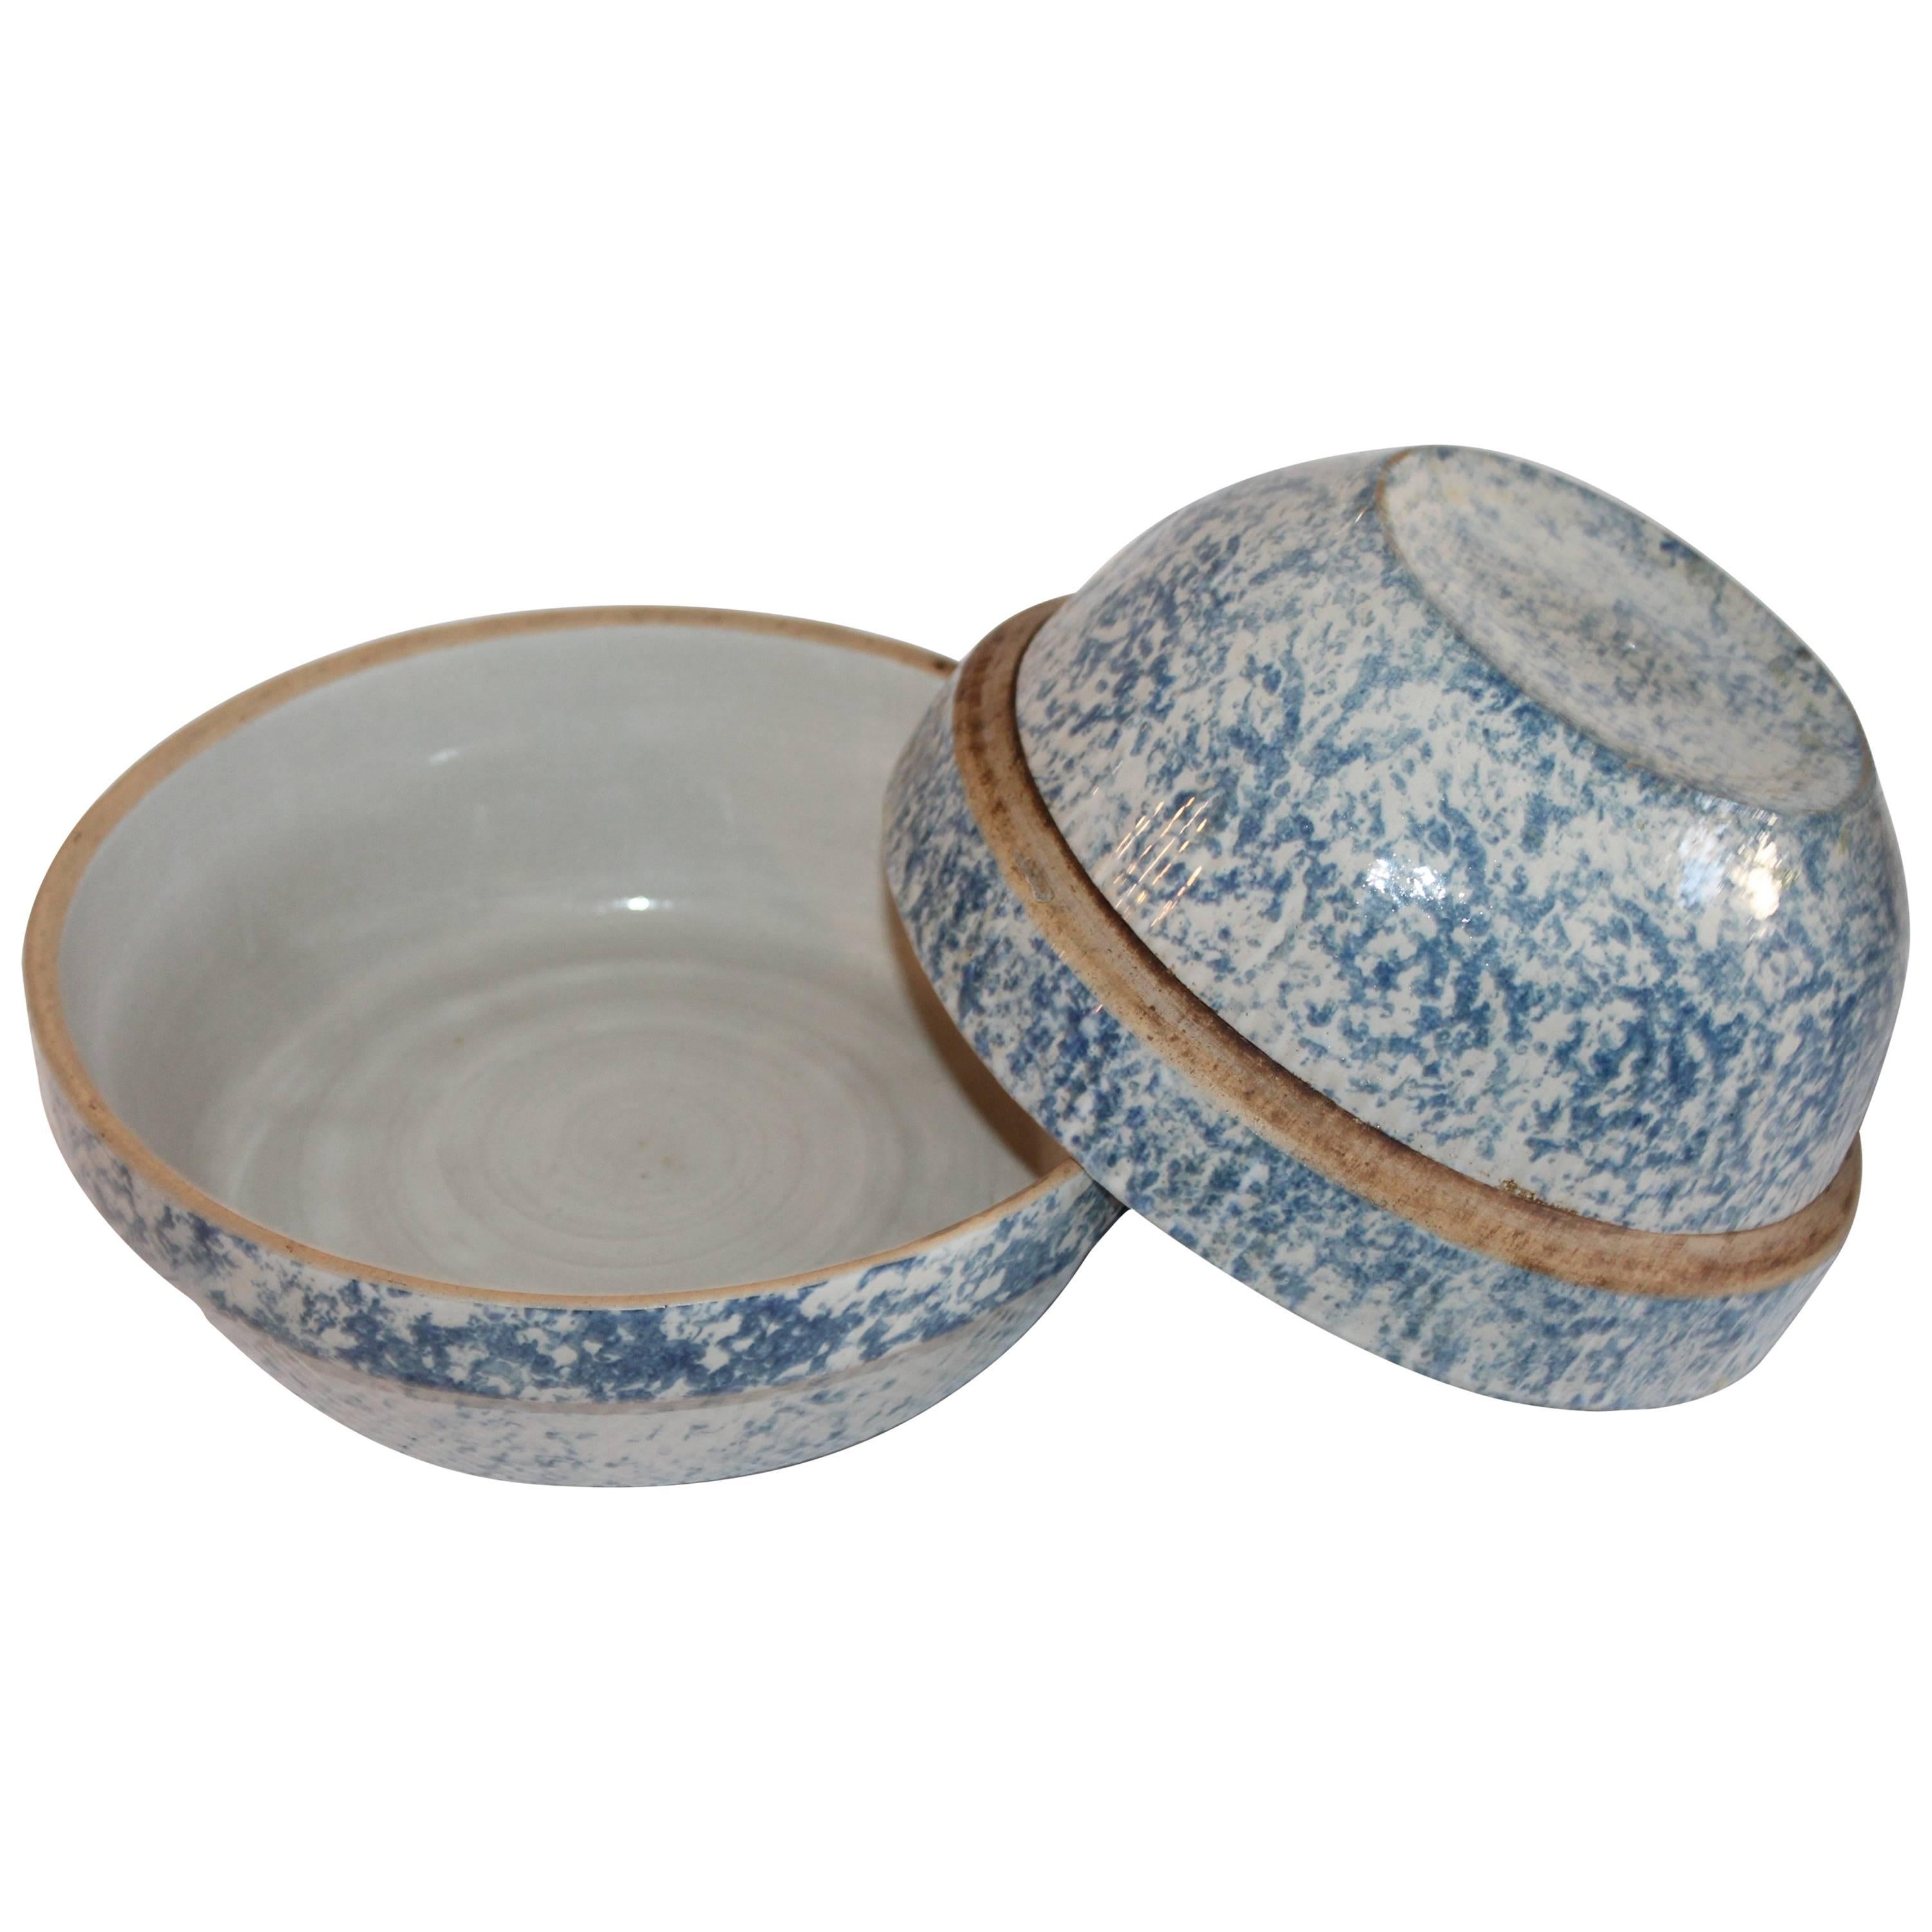 Pair of Sponge Ware Mixing Bowls For Sale